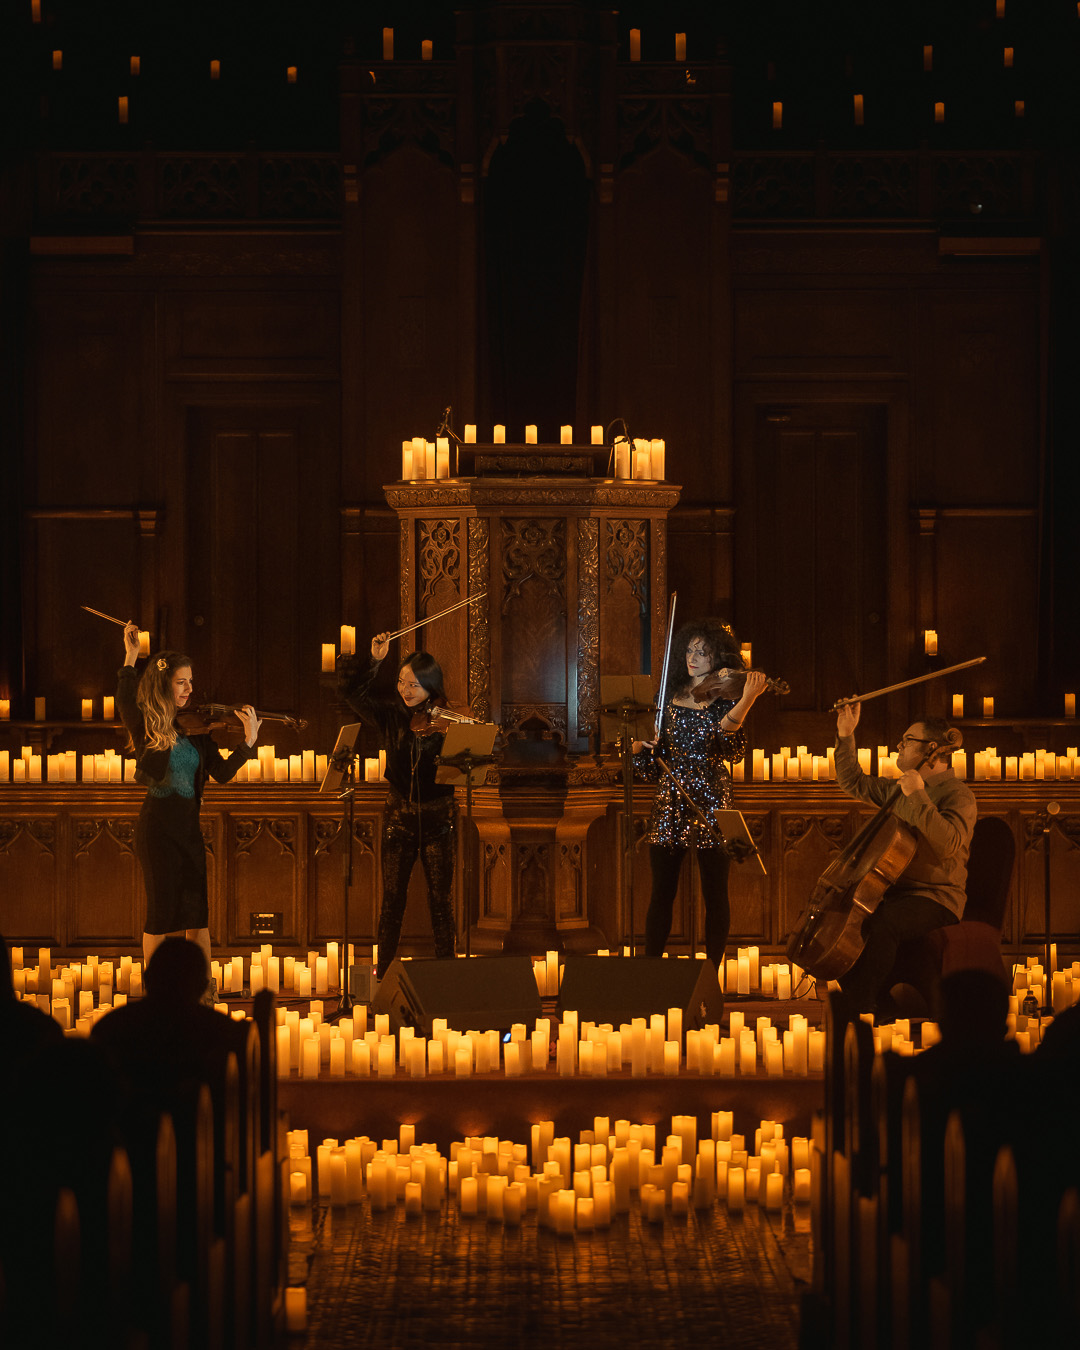 An image of a string quartet performing on a stage surrounded by candles giving off a warm glow